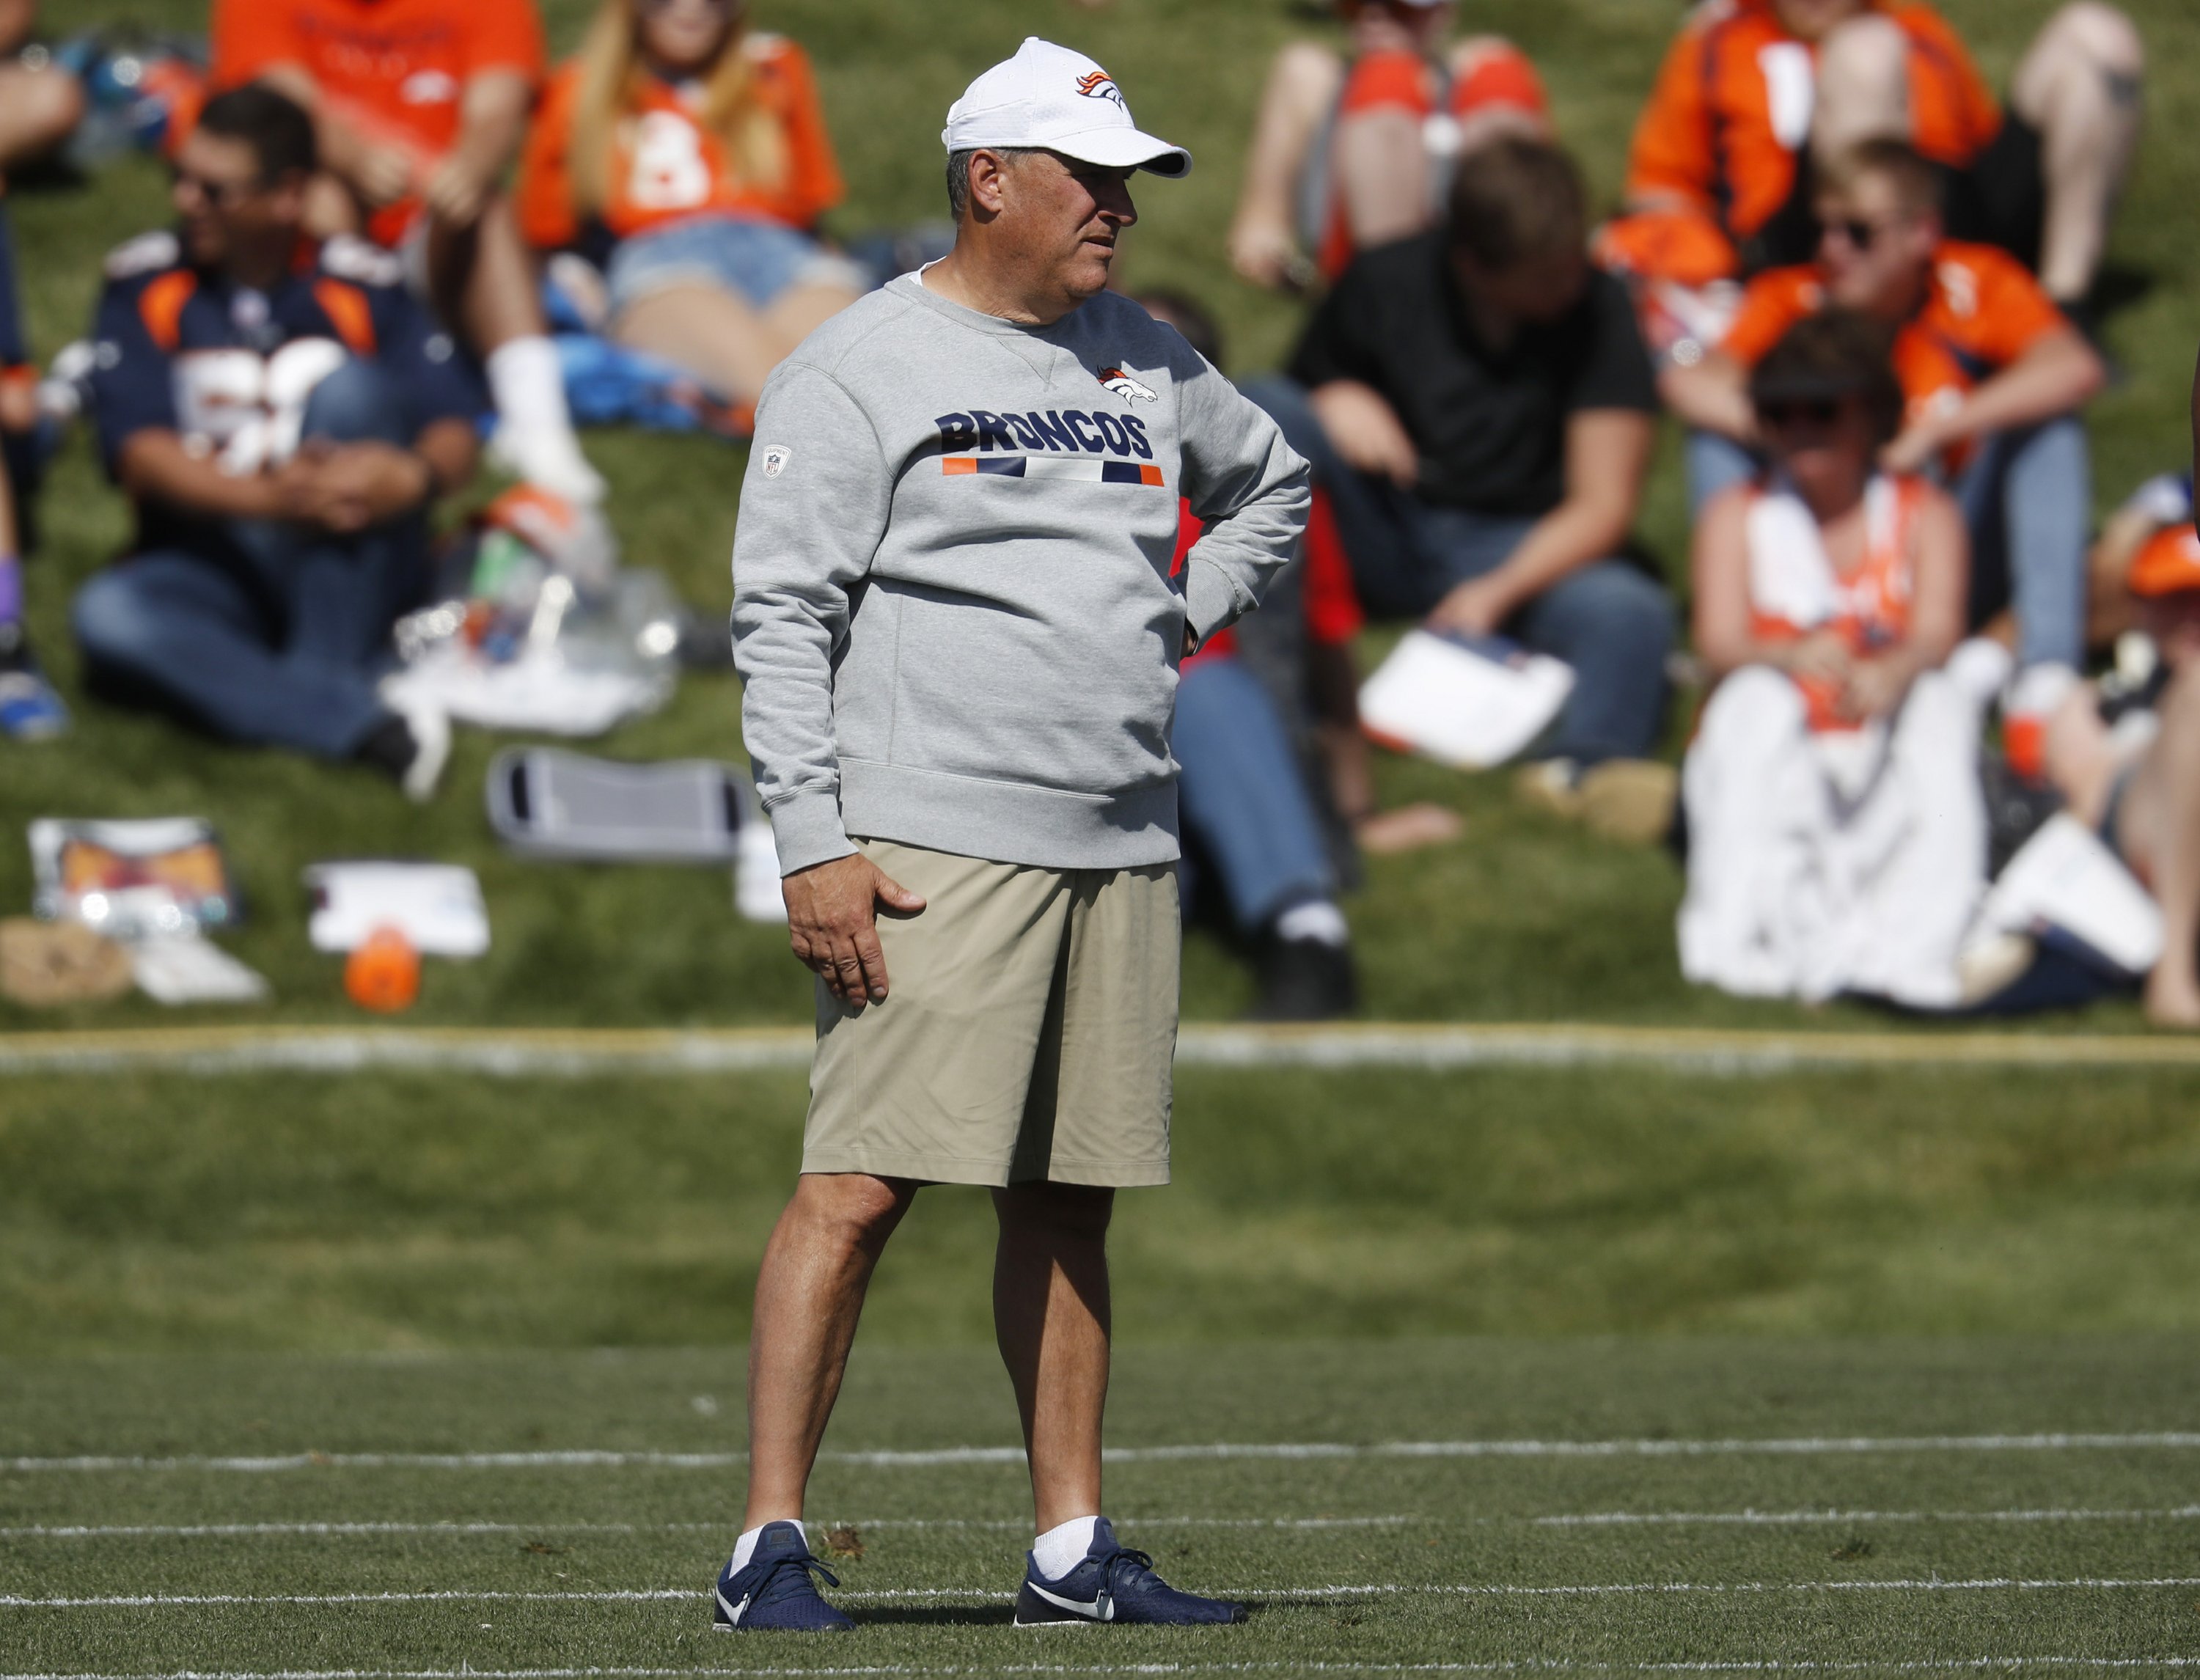 Broncos' new coach Fangio a mix of old-fashioned, newfangled | AP News